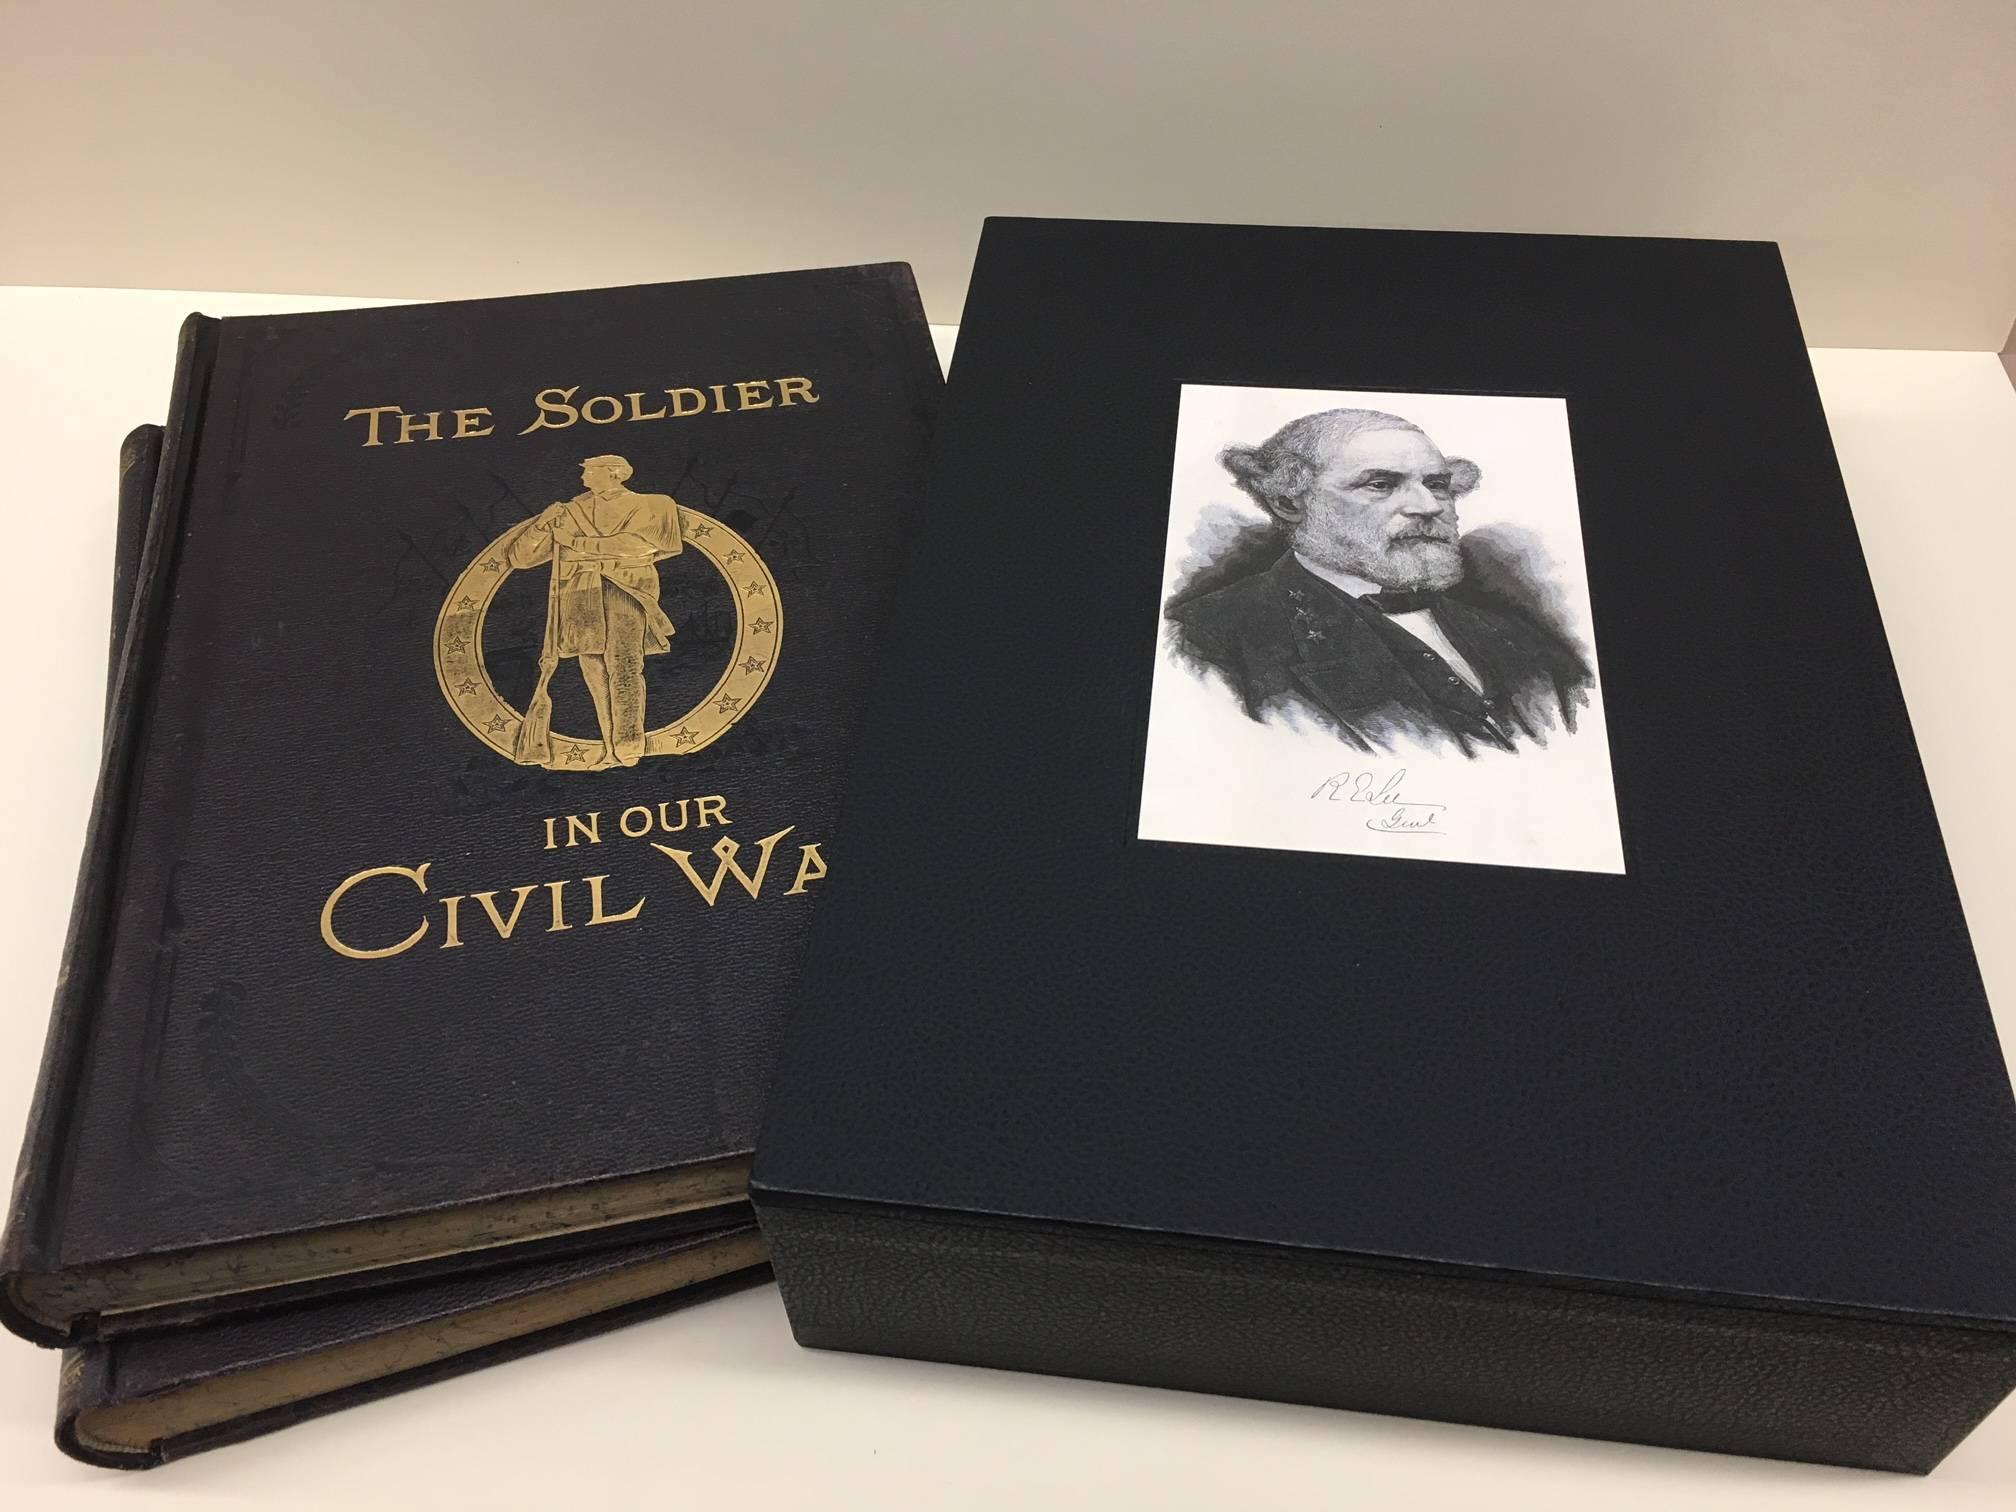 Paul Mottelay's “The Soldier in Our Civil War”, A Pictorial History of the Conflict, 1861-1865, Illustrating the Valor of the Soldier as Displayed on the Battle-field. New York: Stanley Bradley, 1890. Two volumes. 

Second edition of this large